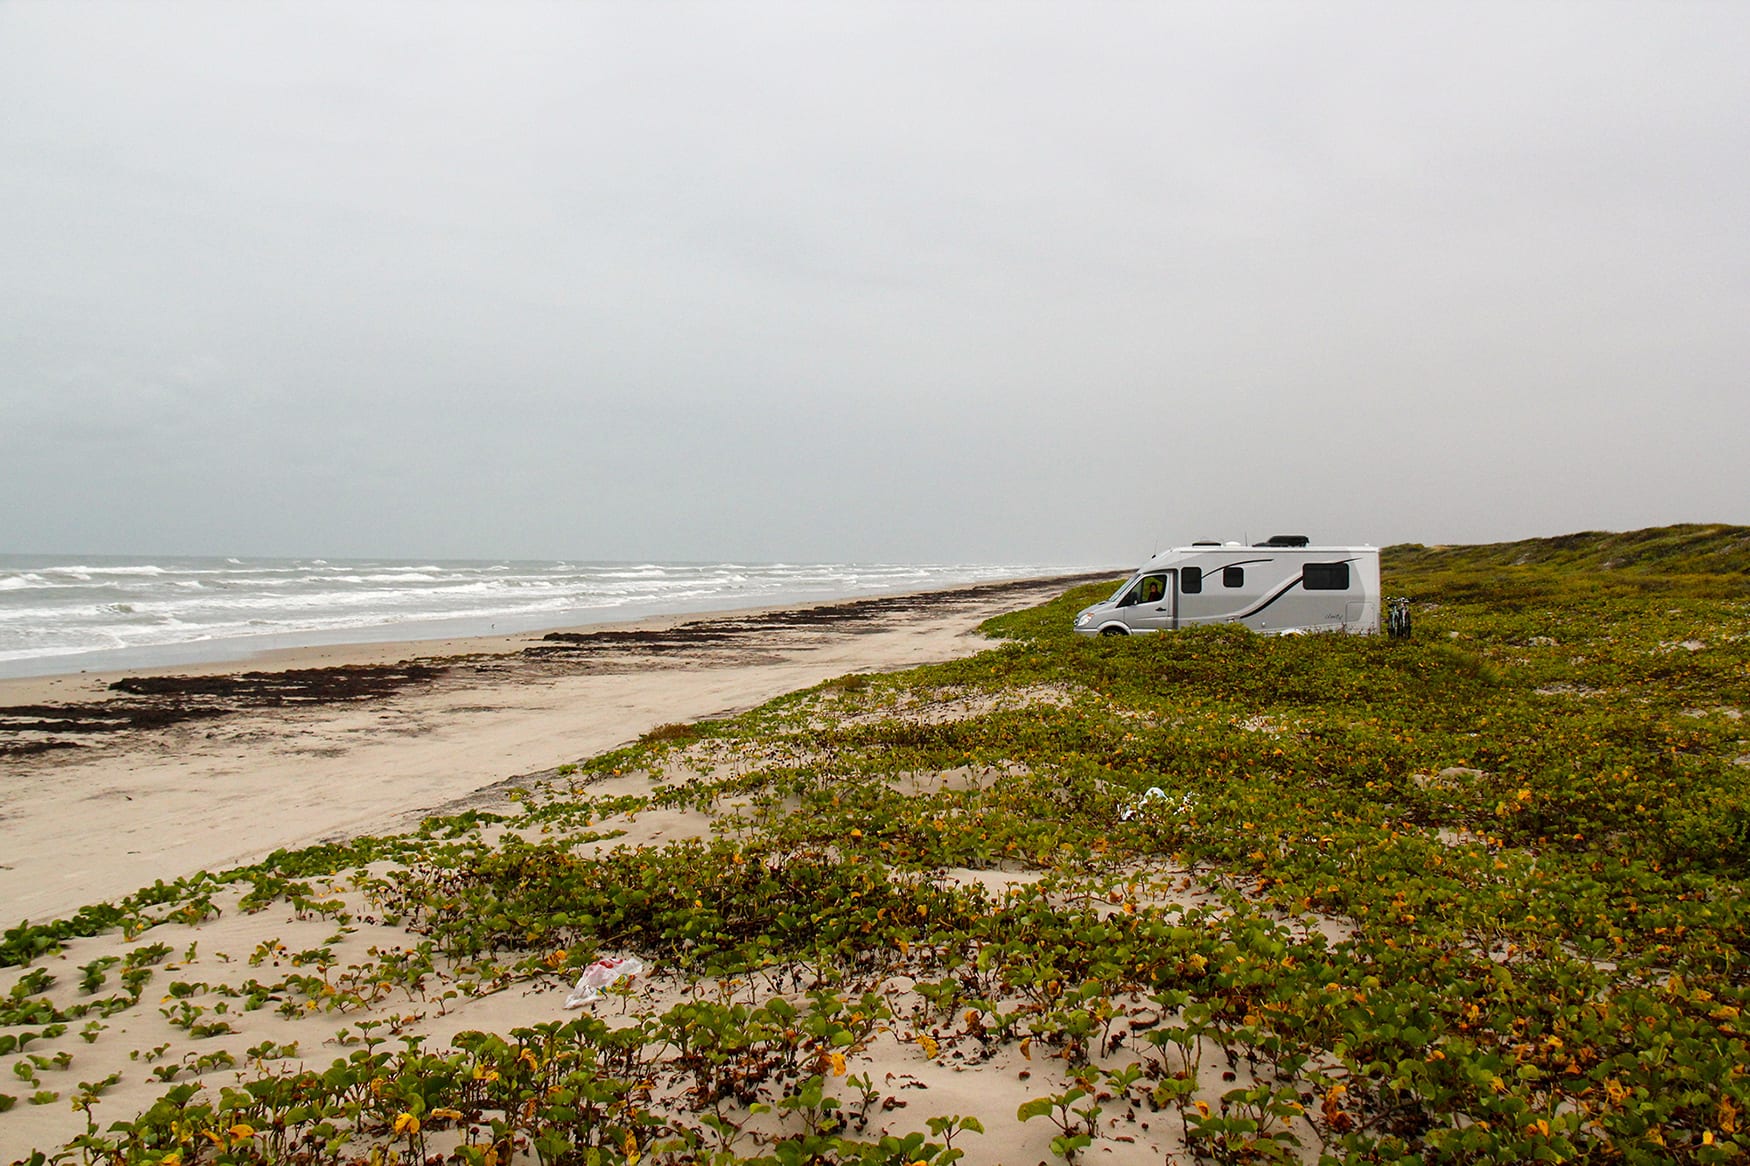 Solitary campers on Padre Island